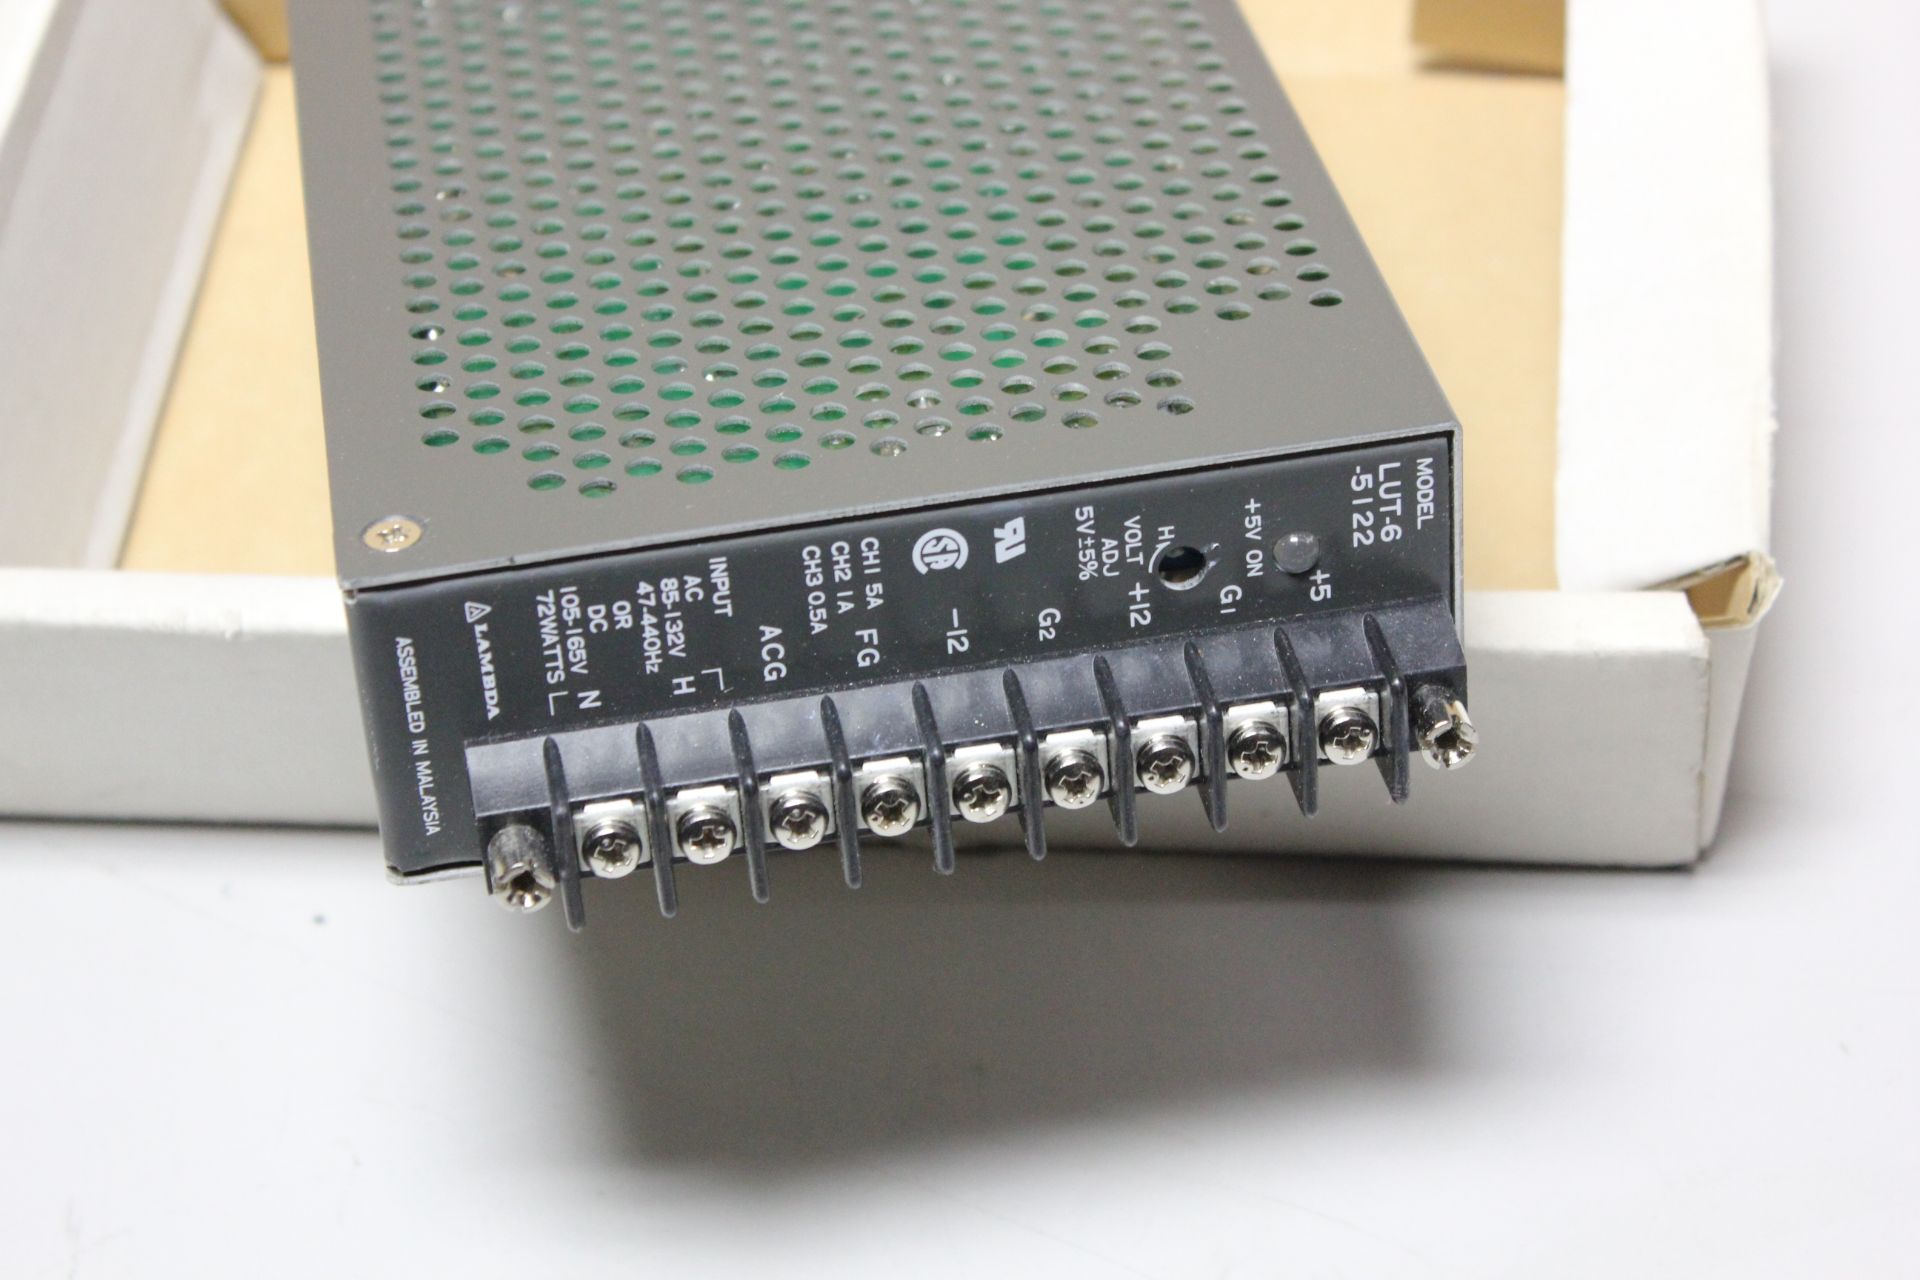 LOT OF NEW LAMBDA INDUSTRIAL AUTOMATION POWER SUPPLIES - Image 5 of 6